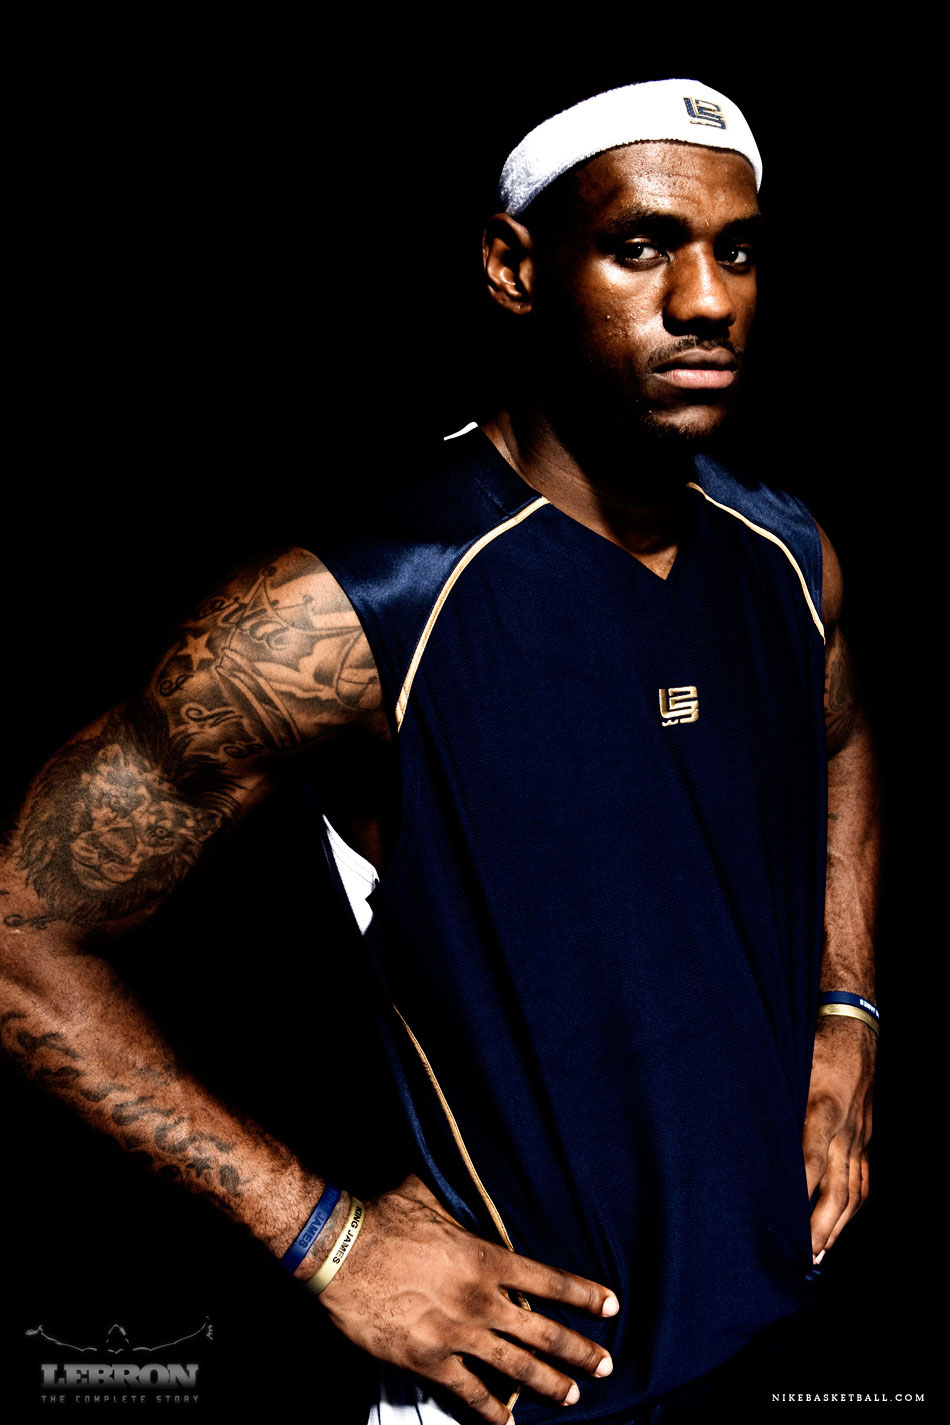 Lebron James Pics Photos Of His Many Tattoos in measurements 950 X 1425